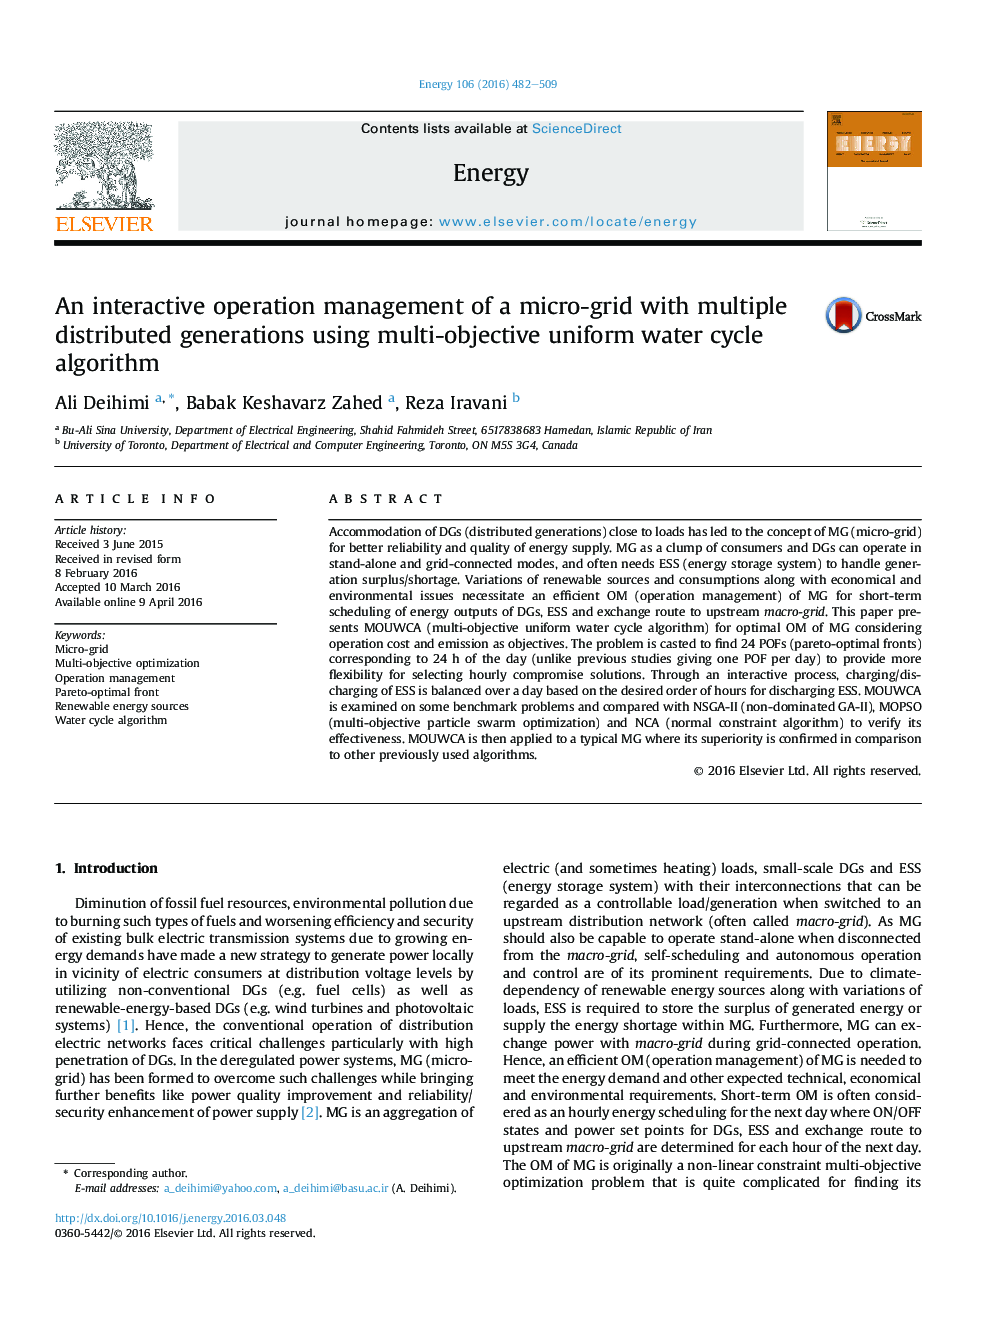 An interactive operation management of a micro-grid with multiple distributed generations using multi-objective uniform water cycle algorithm